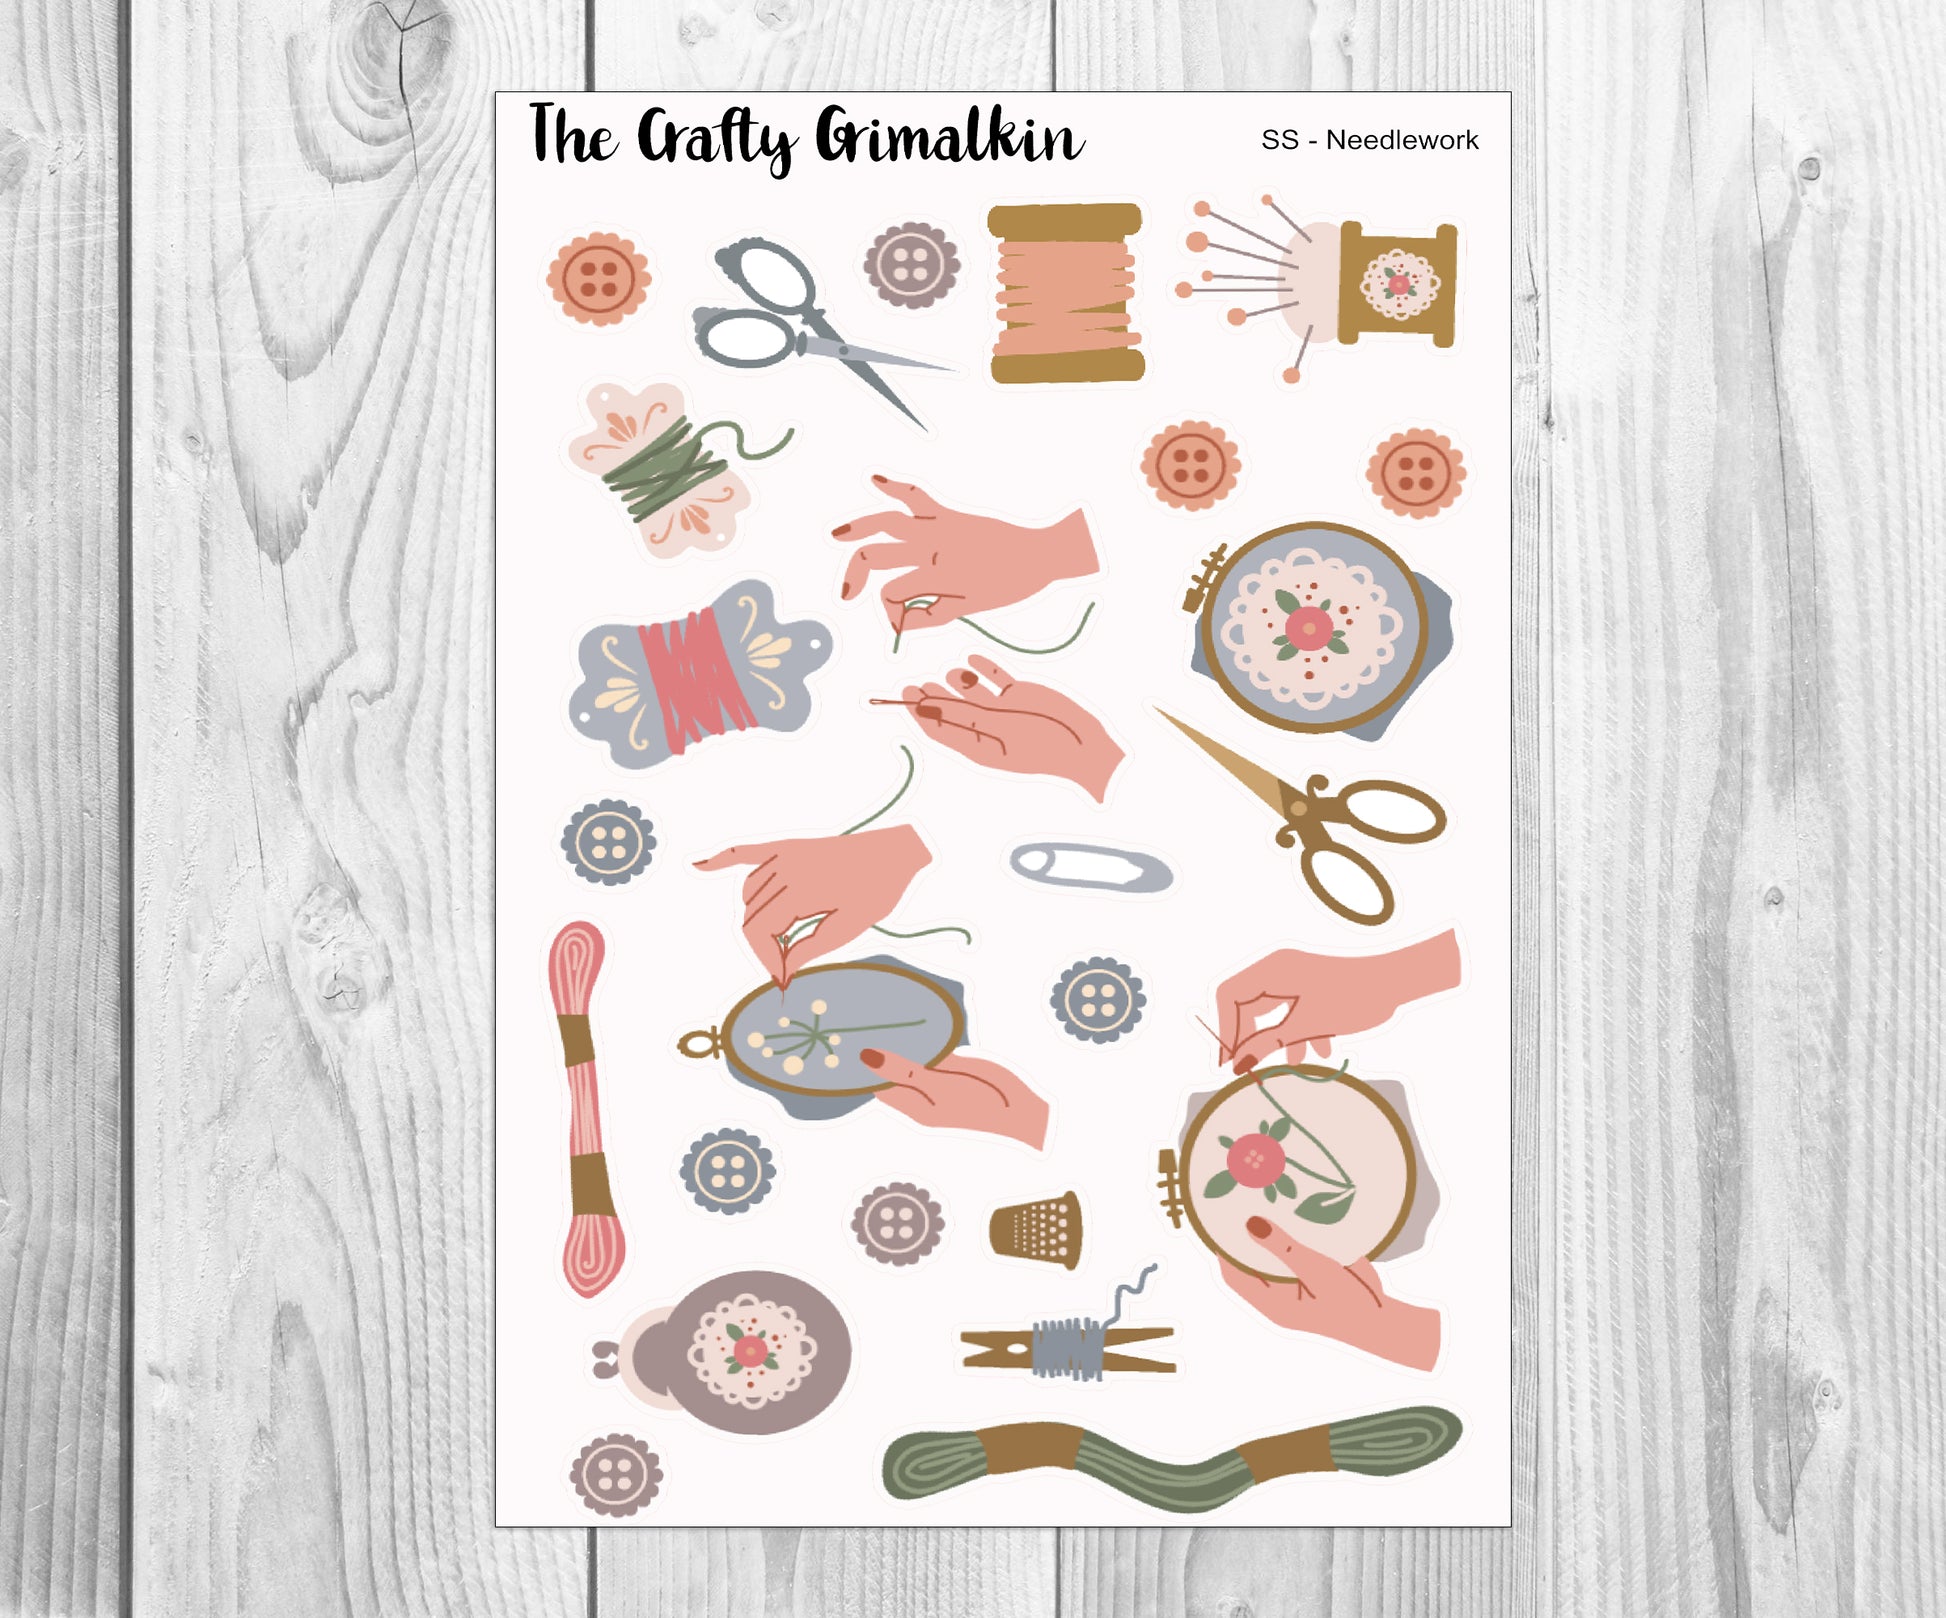 Needlework/Sewing Sticker Sheet for Journals, Scrapbooks or Planners, Decorative Stickers, Decorative Stickers, The Crafty Grimalkin - A Cross Stitch Store